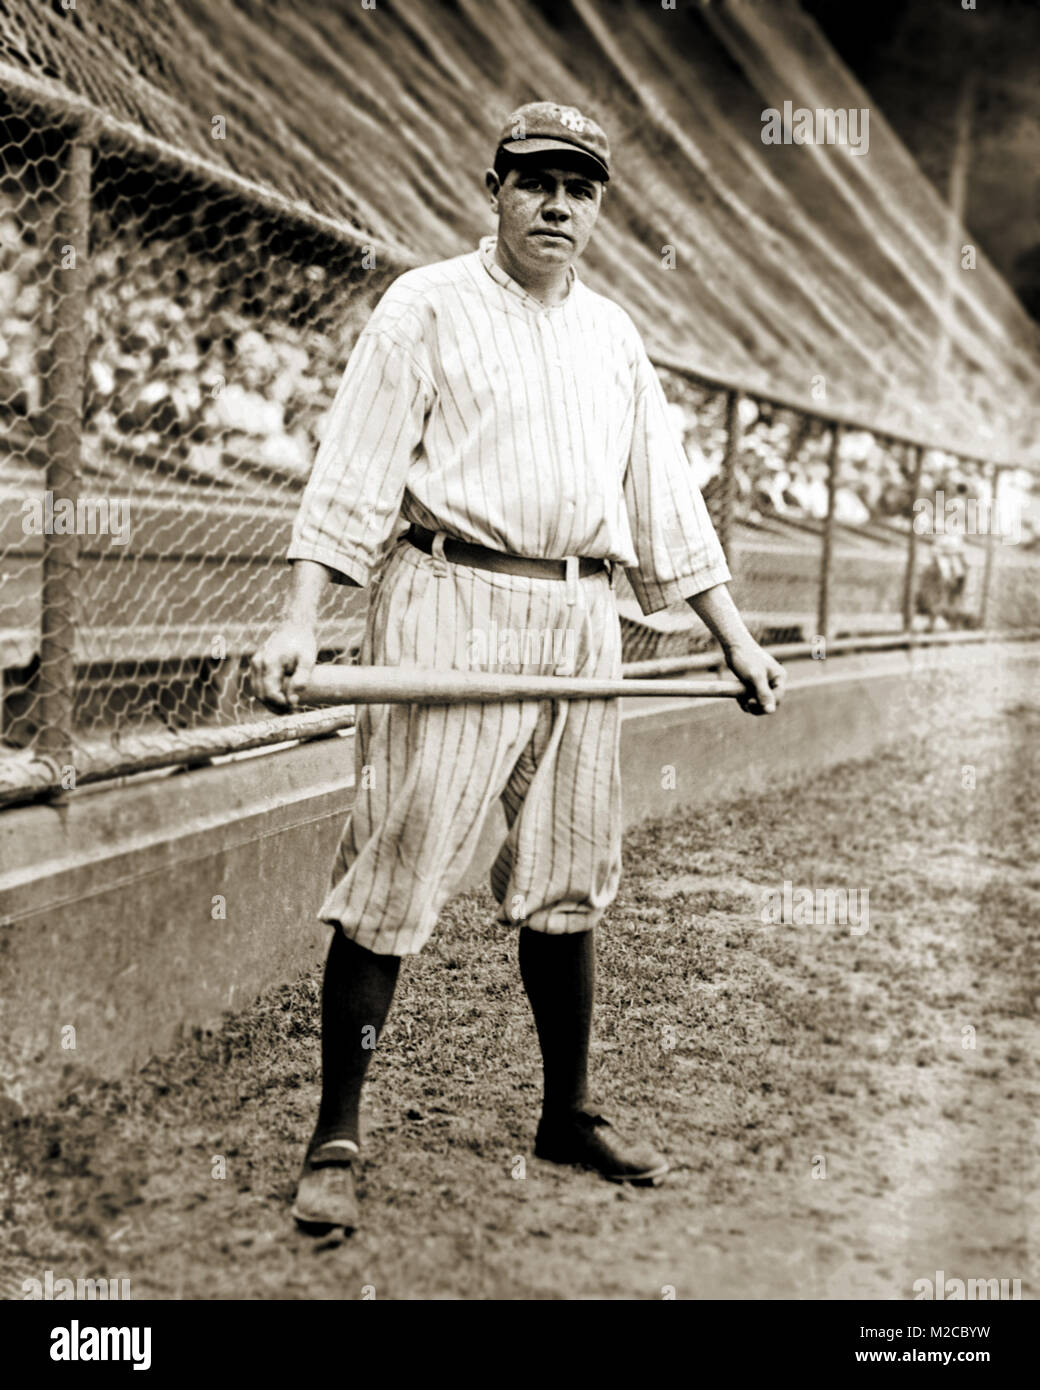 George Herman Babe Ruth of the New York Yankees. Photograph from